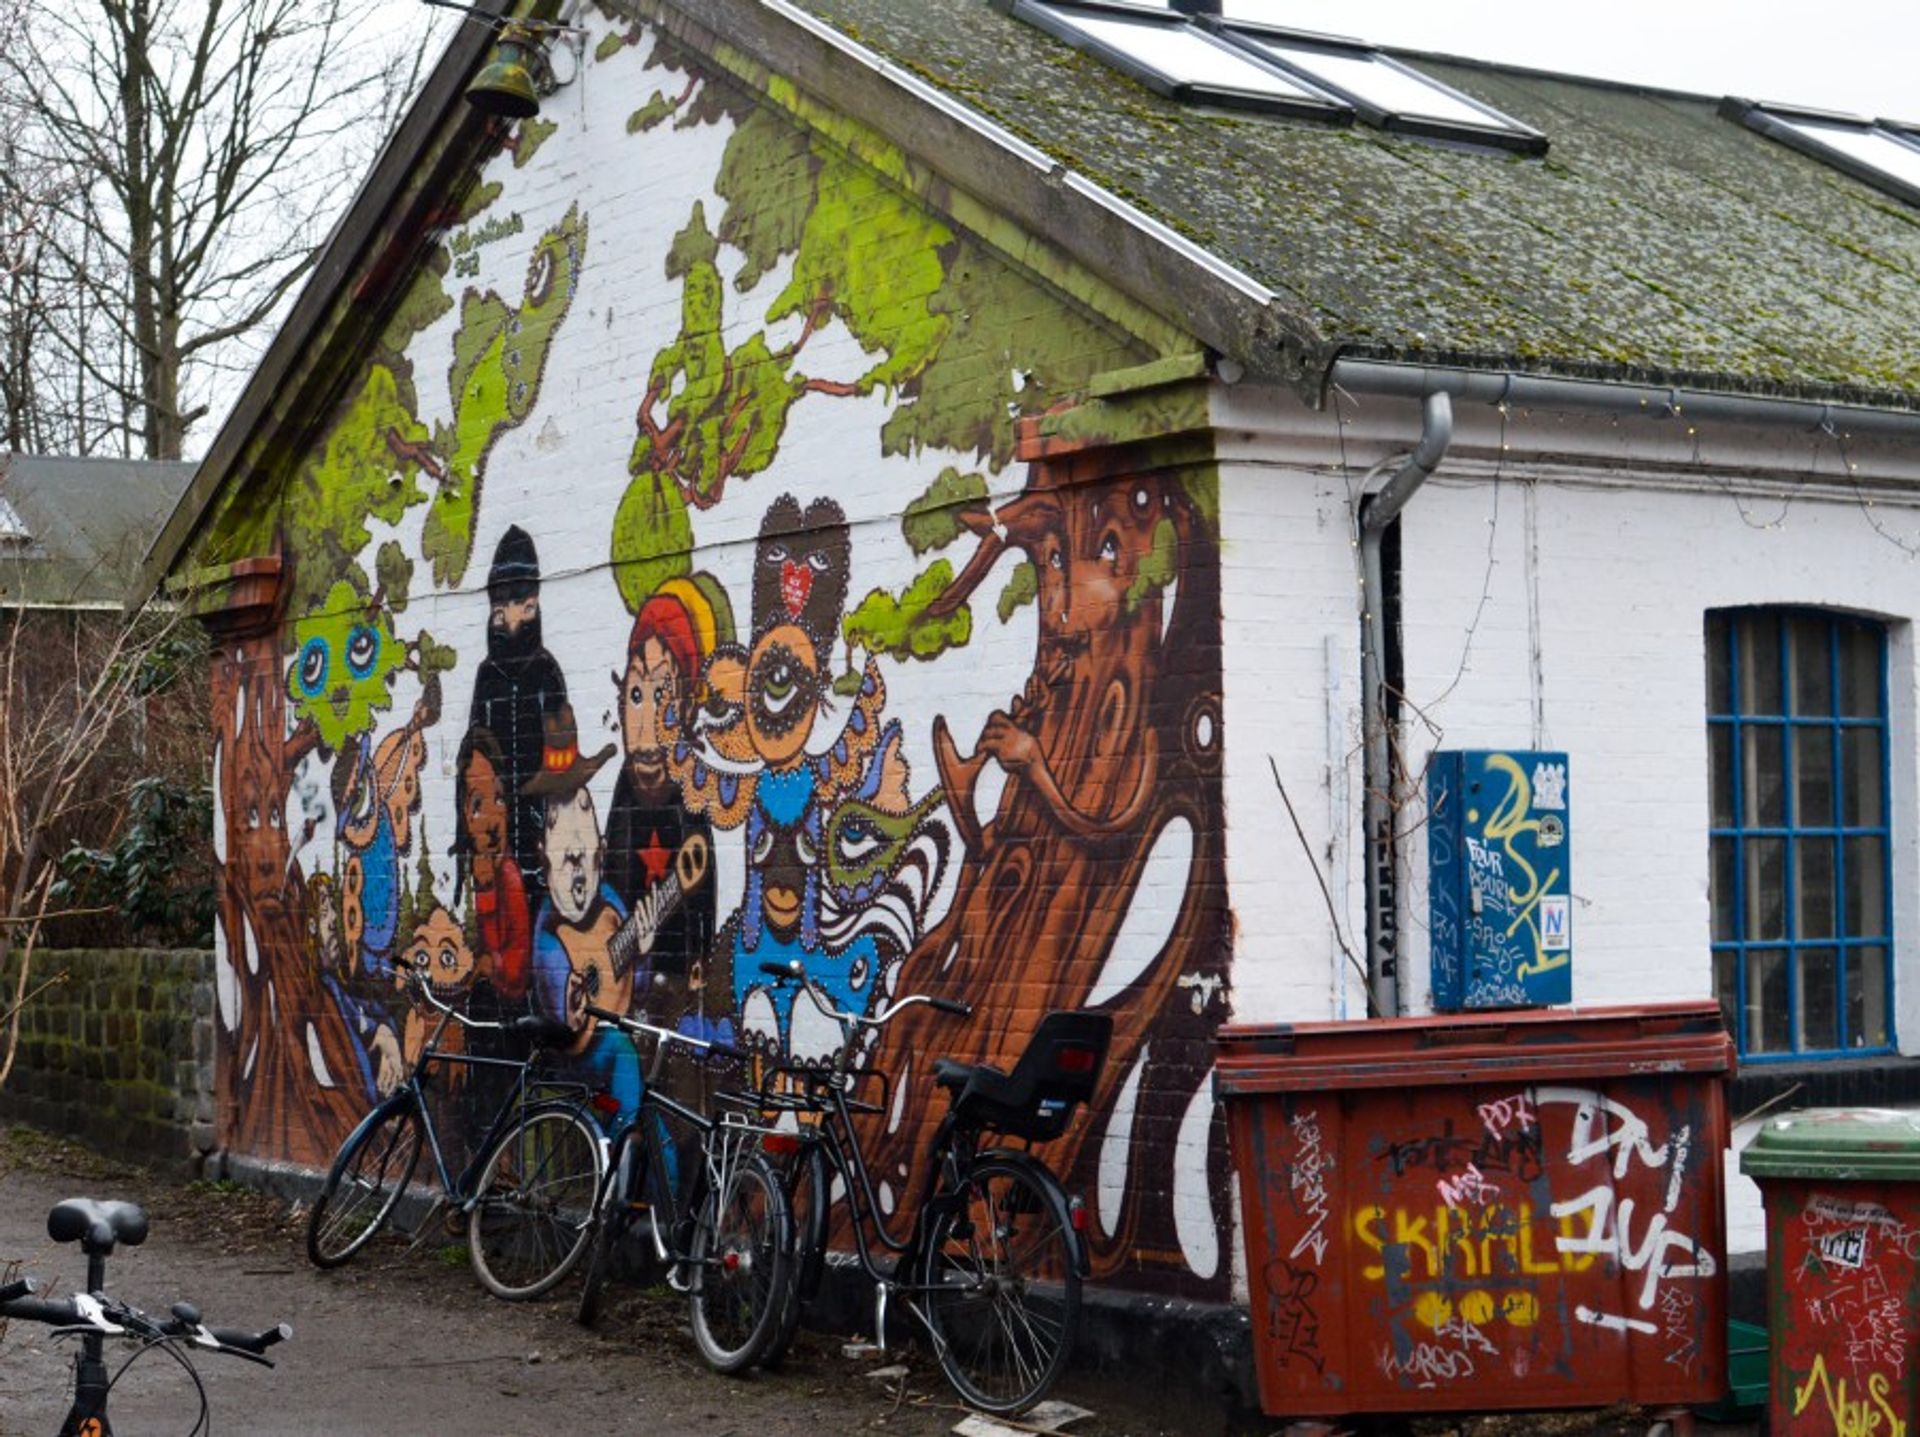 Typical houses in Christiania - love the murals, so dreamyy